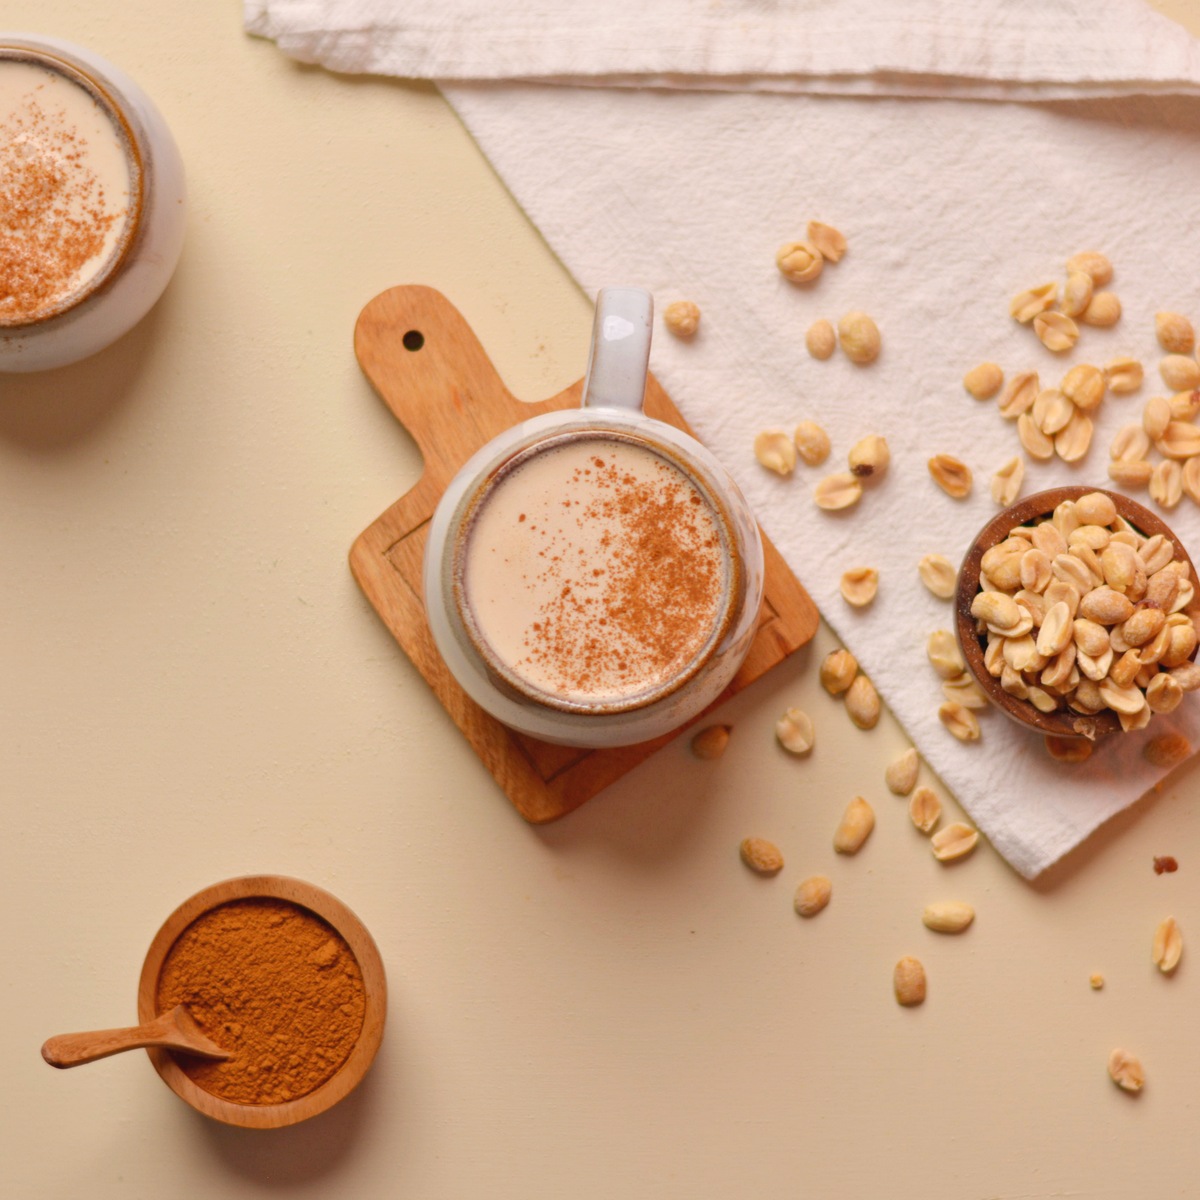 Overhead view of peanut butter latte in a mug with peanuts scattered around.